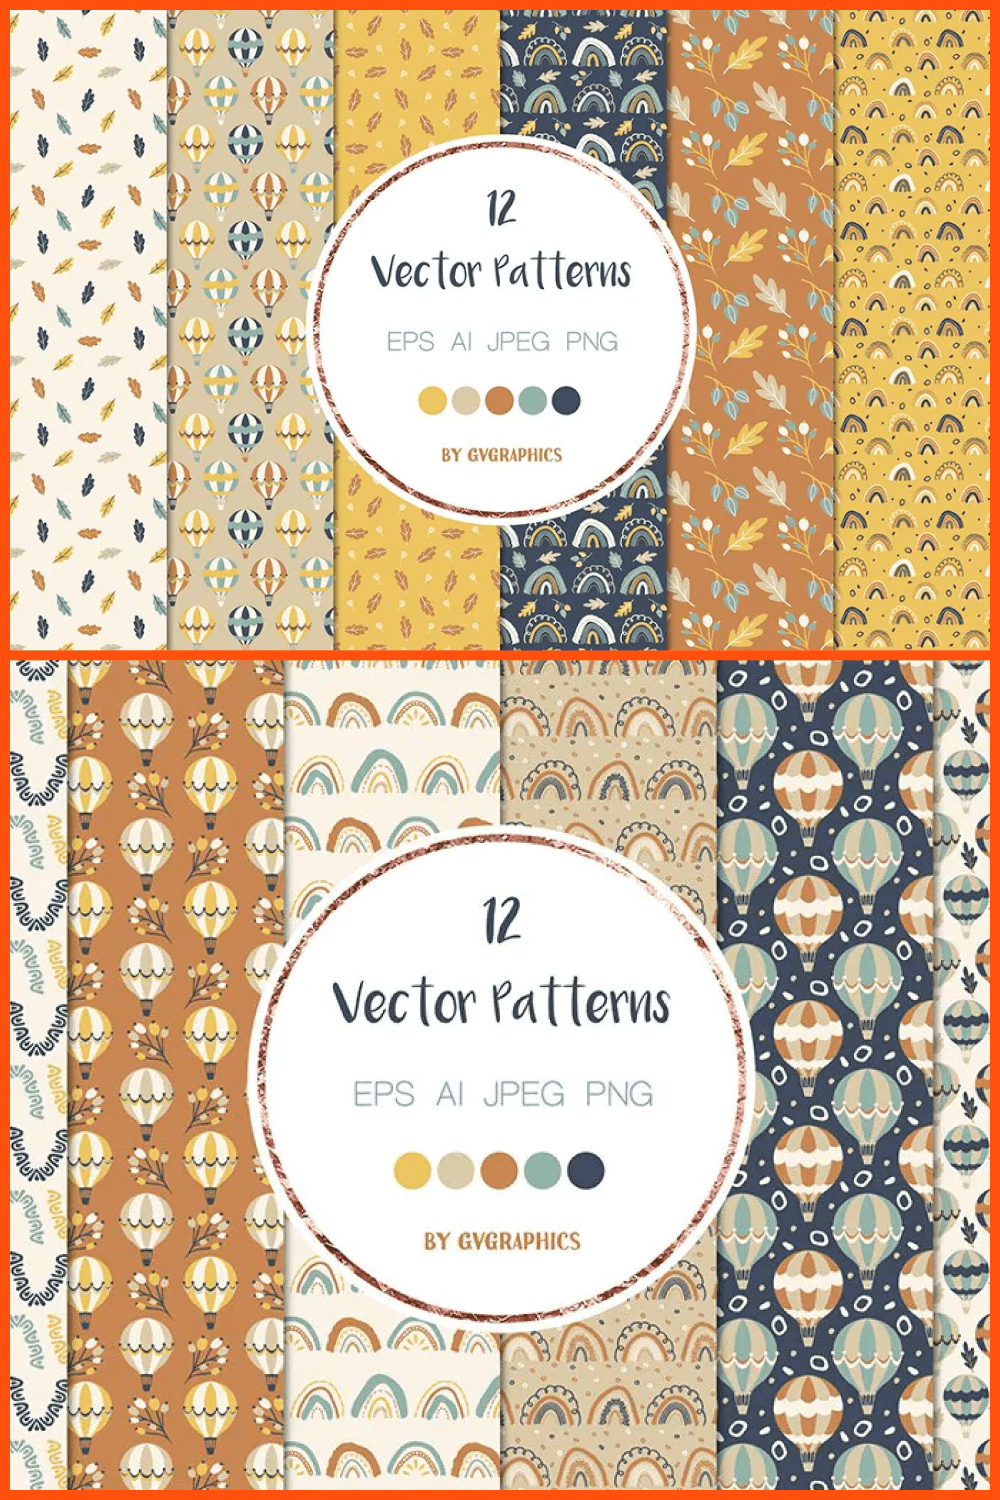 Autumn Air Balloons, Rainbows and Leaves Vector Patterns and Seamless Tiles.